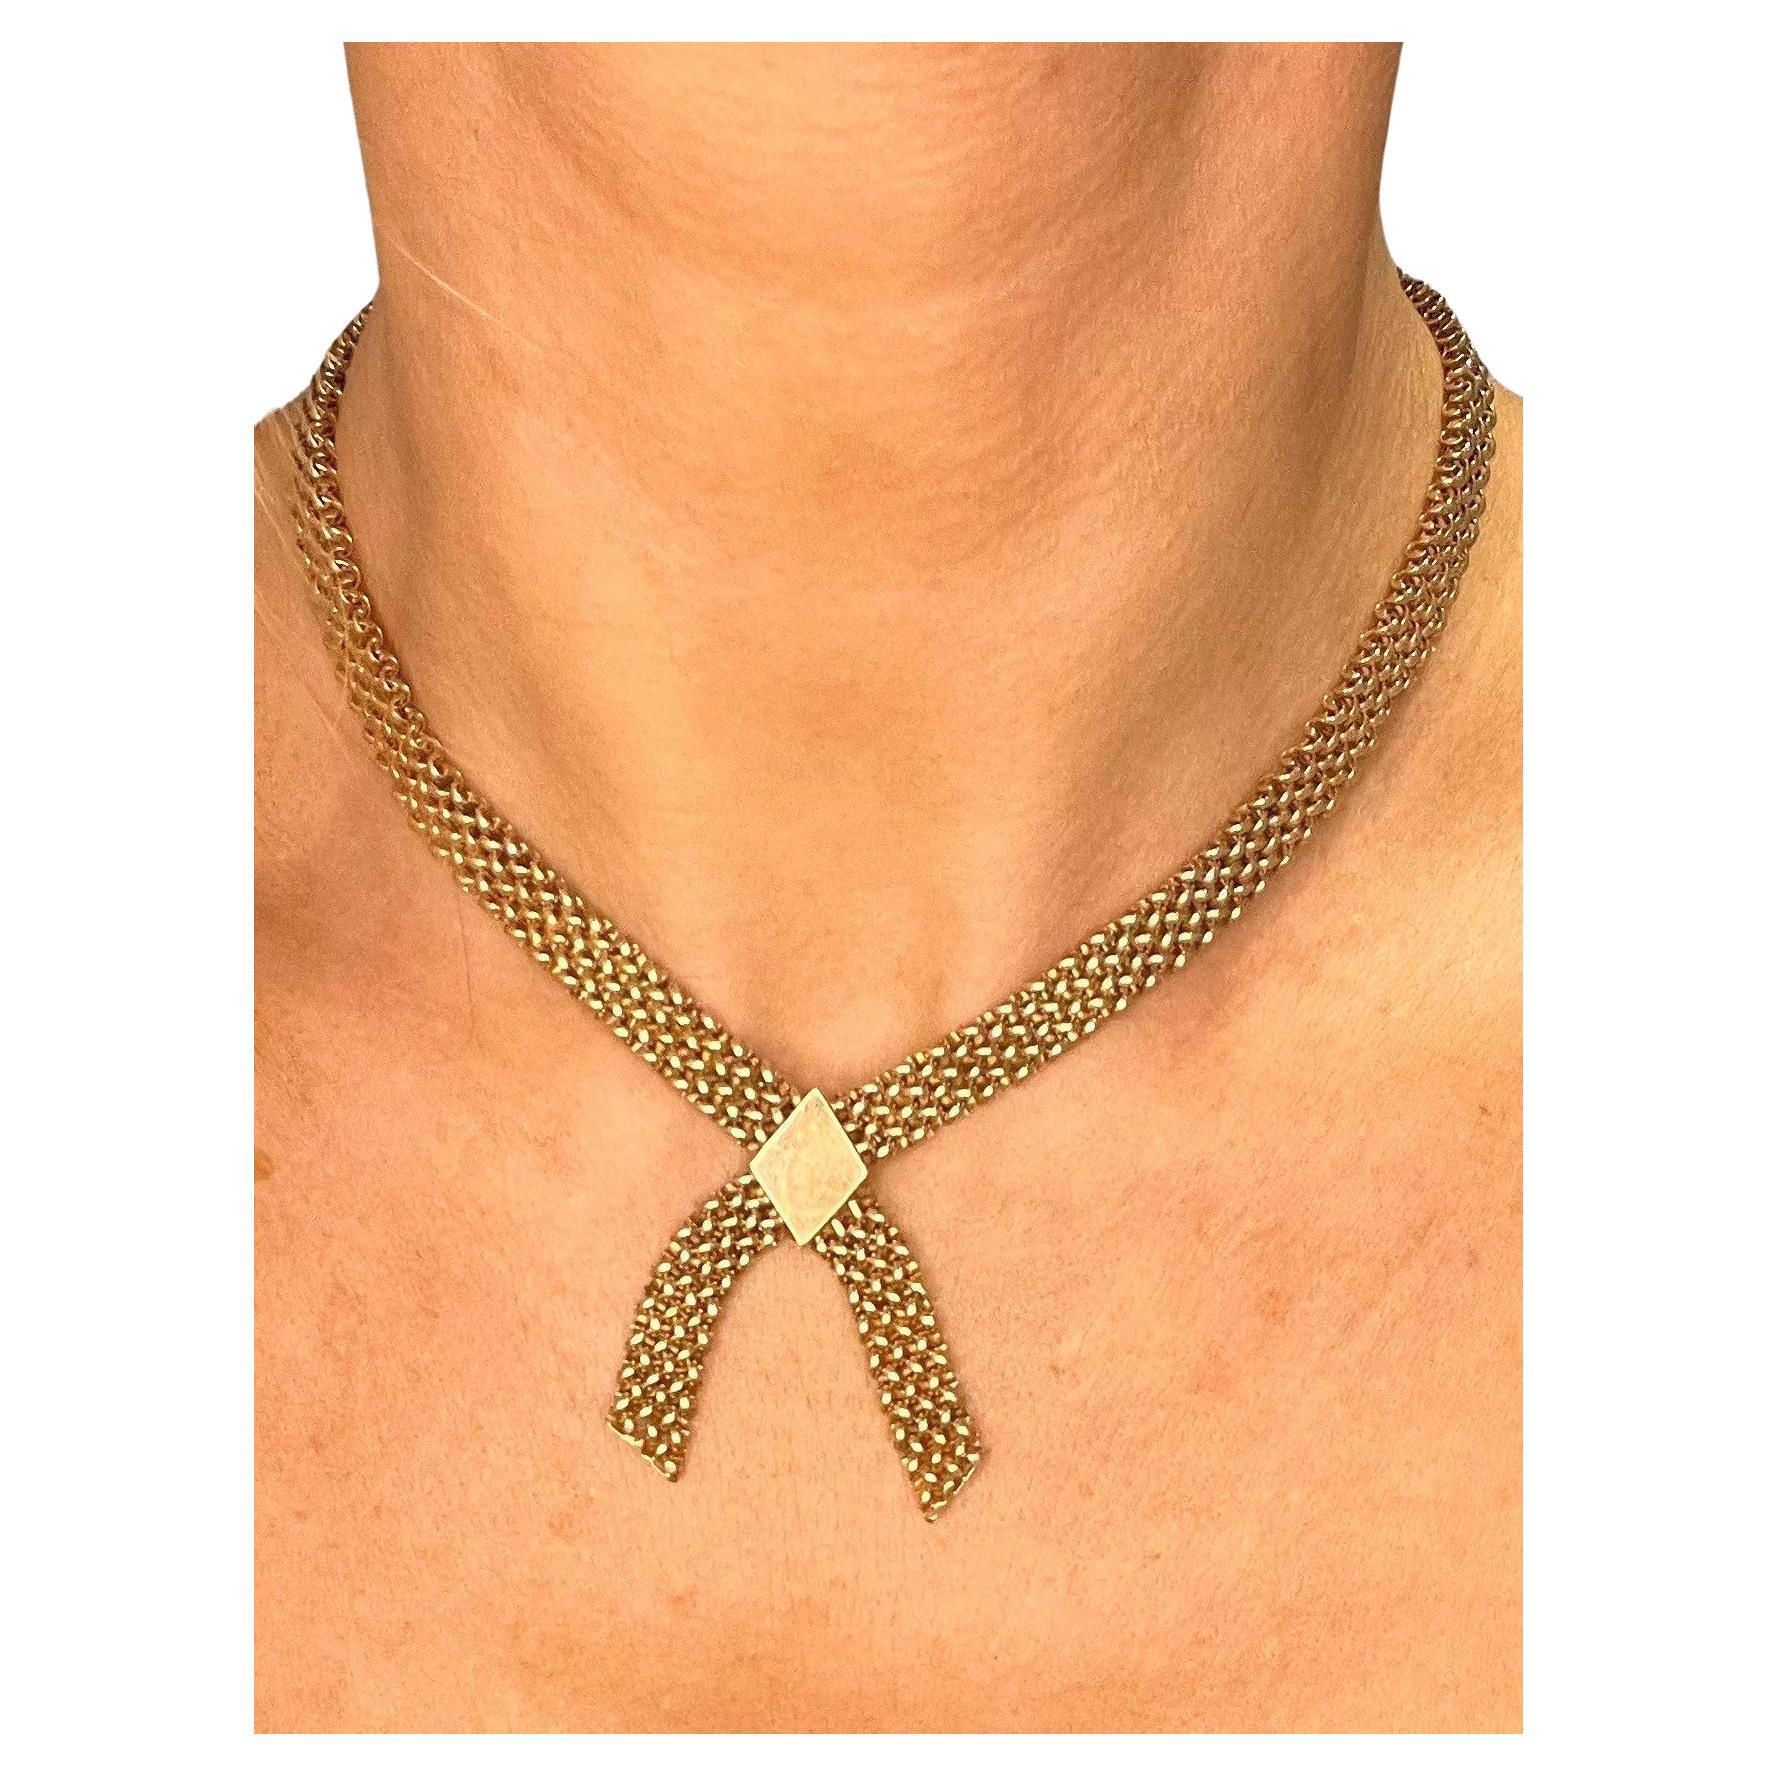 Vintage 9ct Gold Woven Link 1990s Cross Over Collar Necklace 